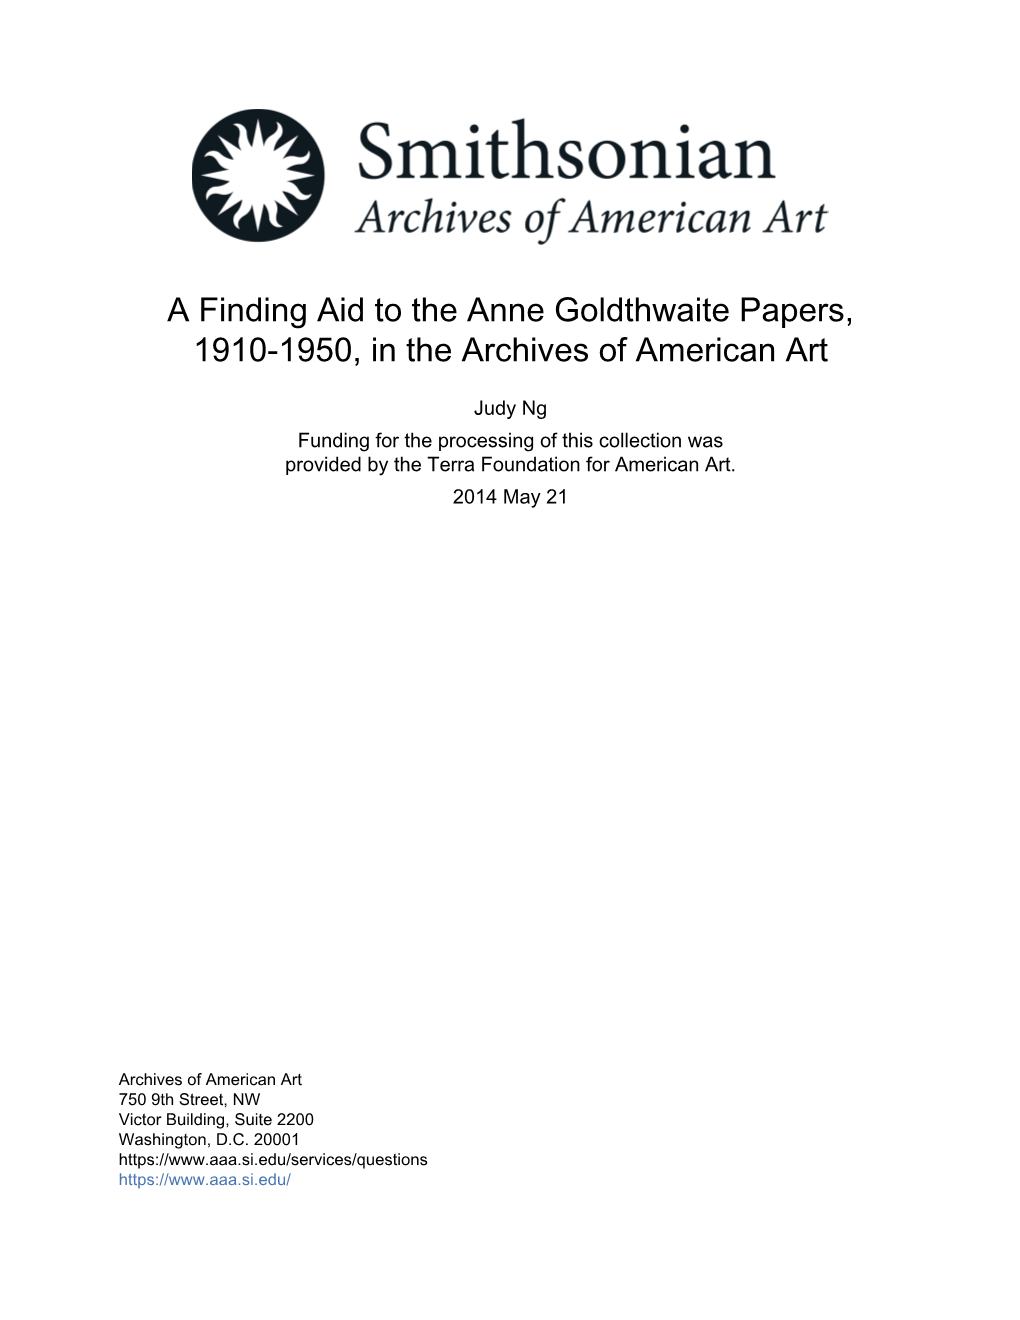 A Finding Aid to the Anne Goldthwaite Papers, 1910-1950, in the Archives of American Art